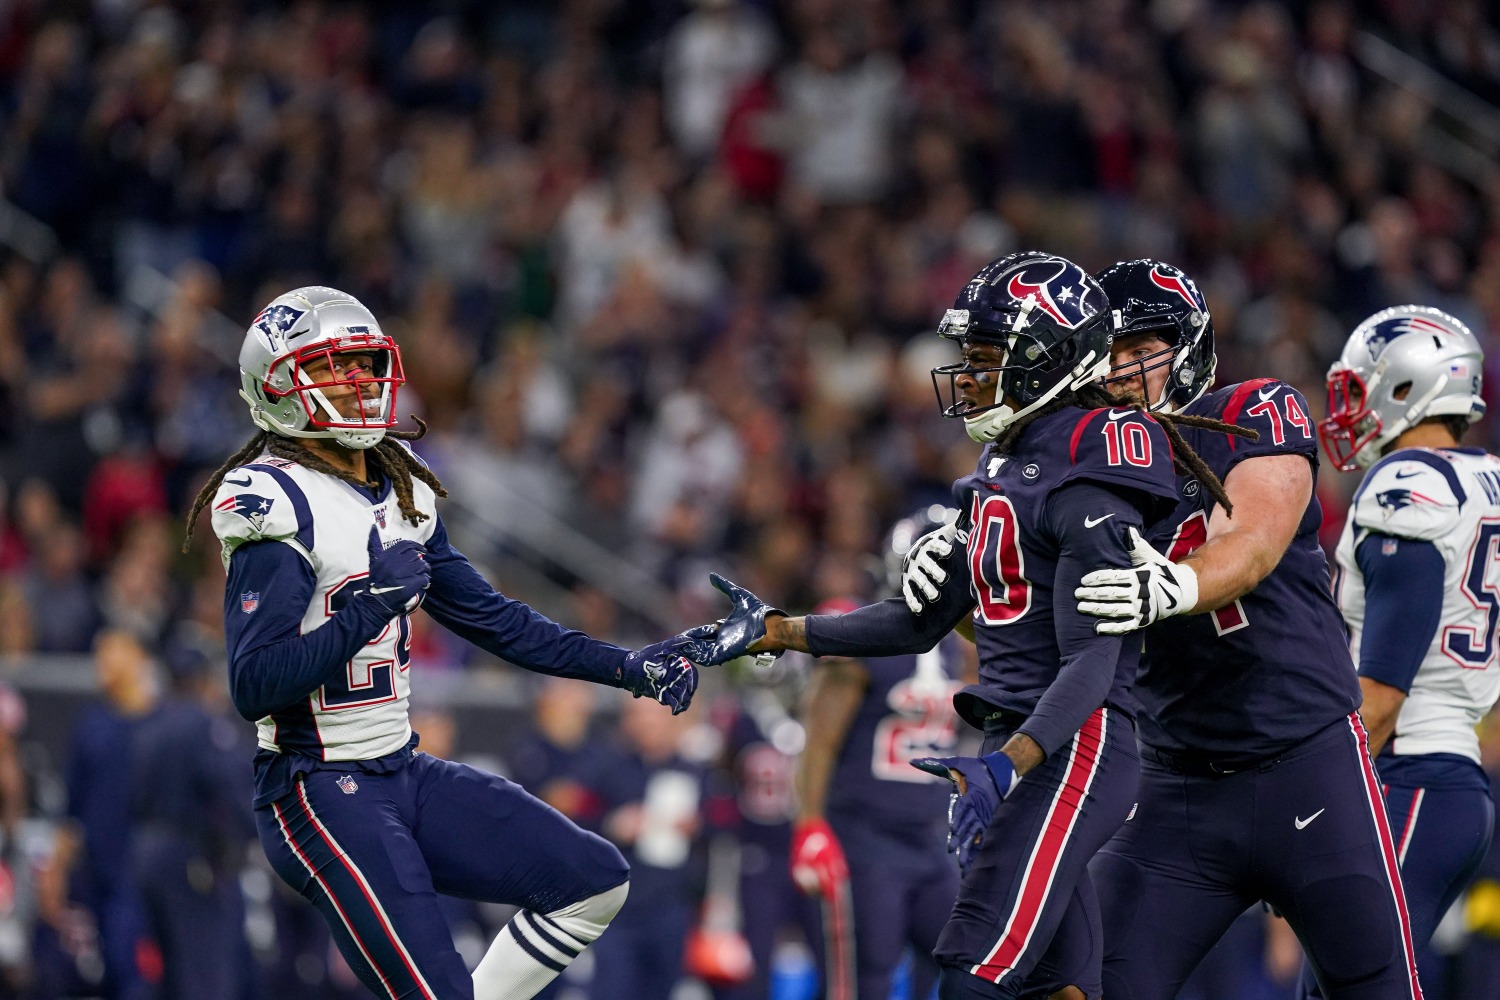 Stephon Gilmore and DeAndre Hopkins have a bitter rivalry.